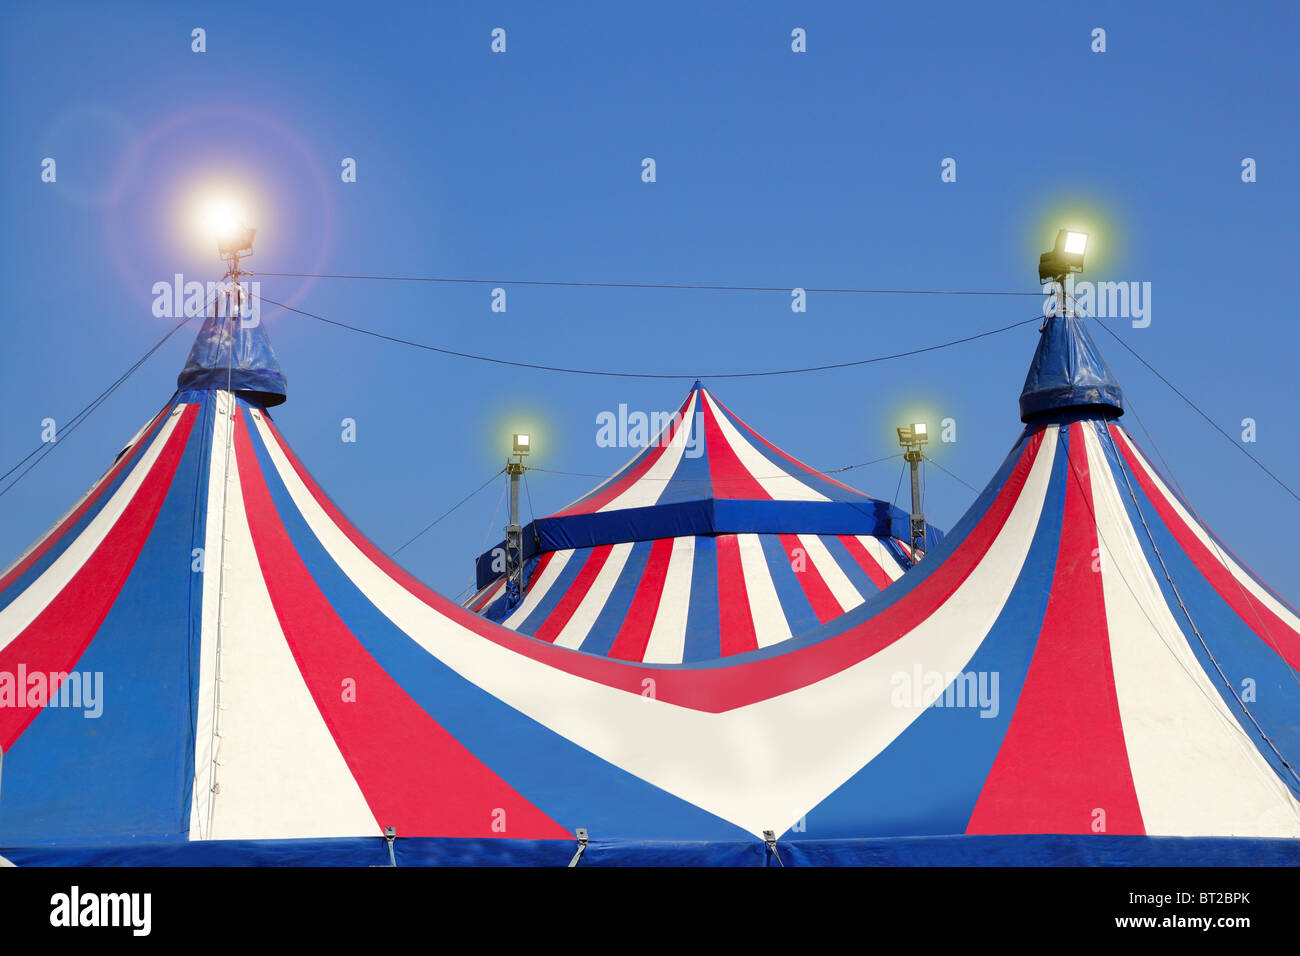 Circus tent under blue sky colorful stripes red white Stock Photo